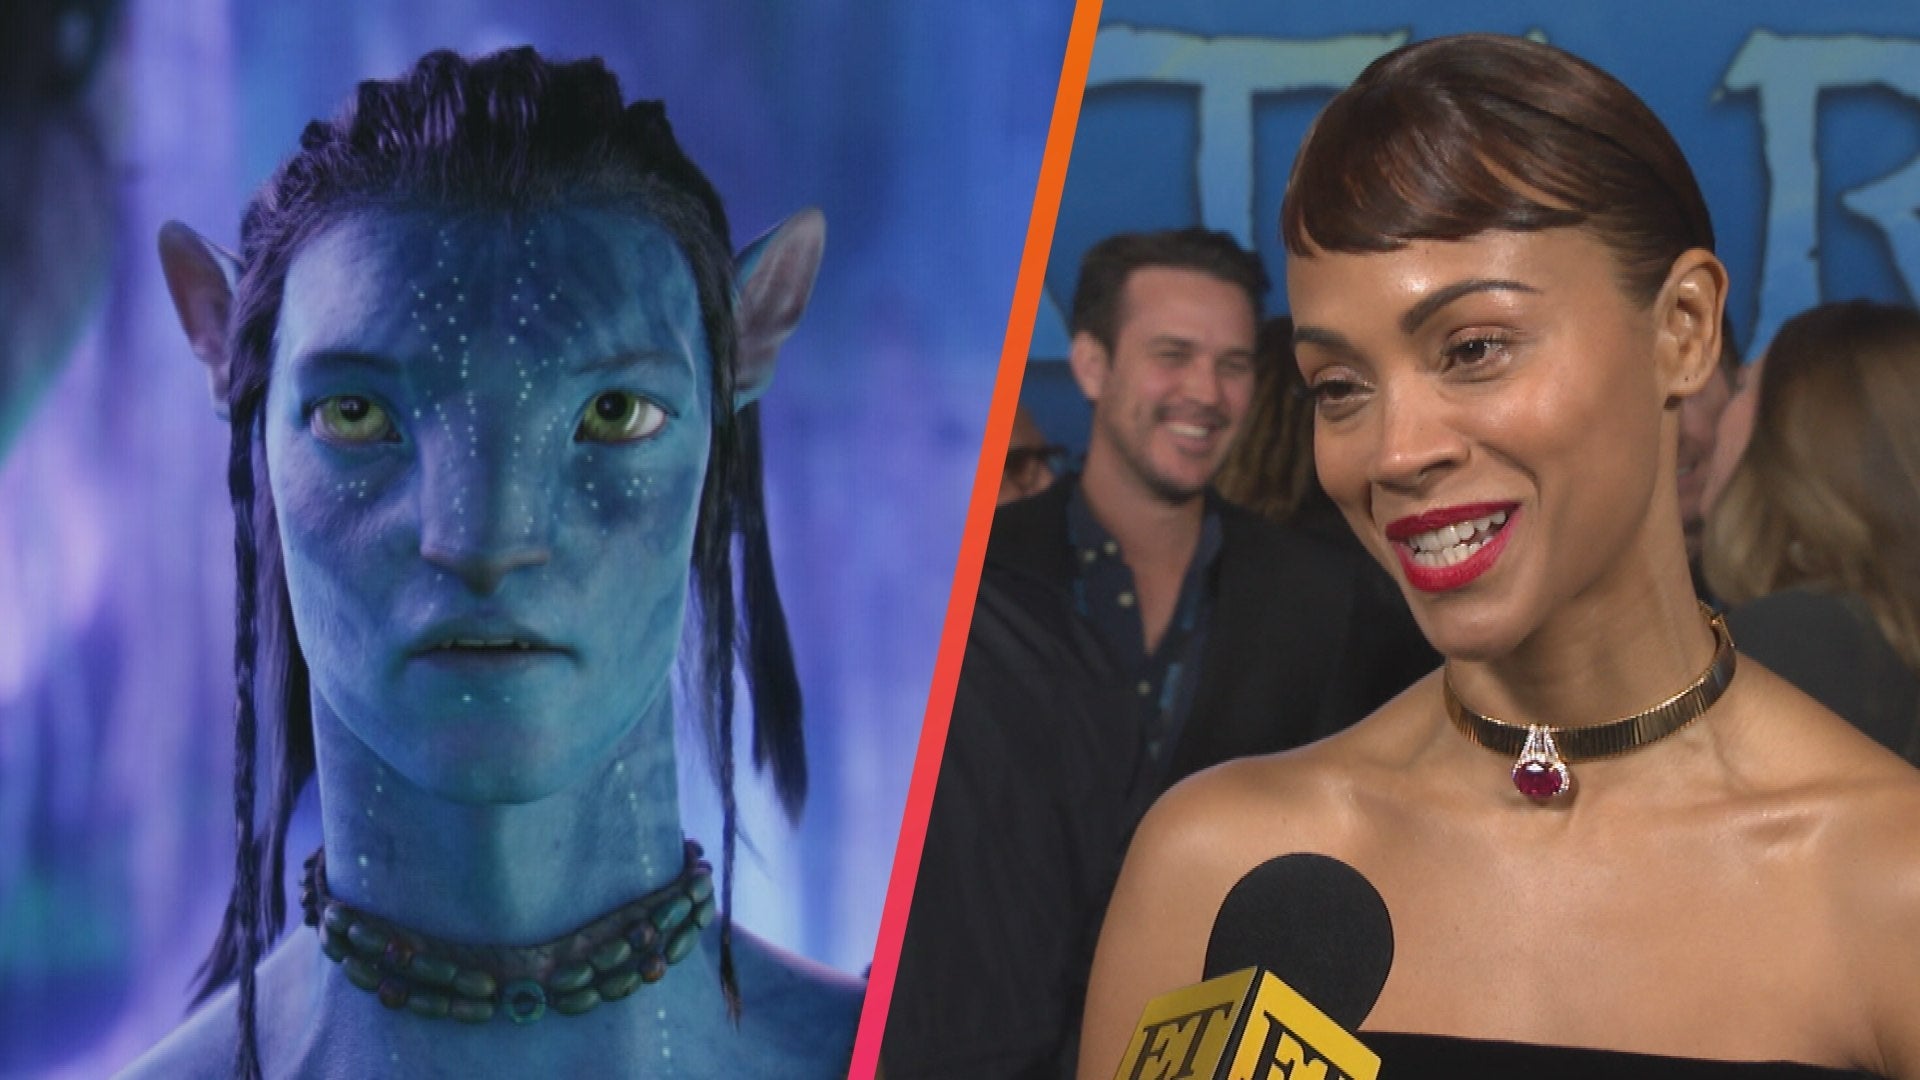 Watch 'Avatar' Cast Recap 2009 Movie to Pregame for 'The Way of Water' (Exclusive)